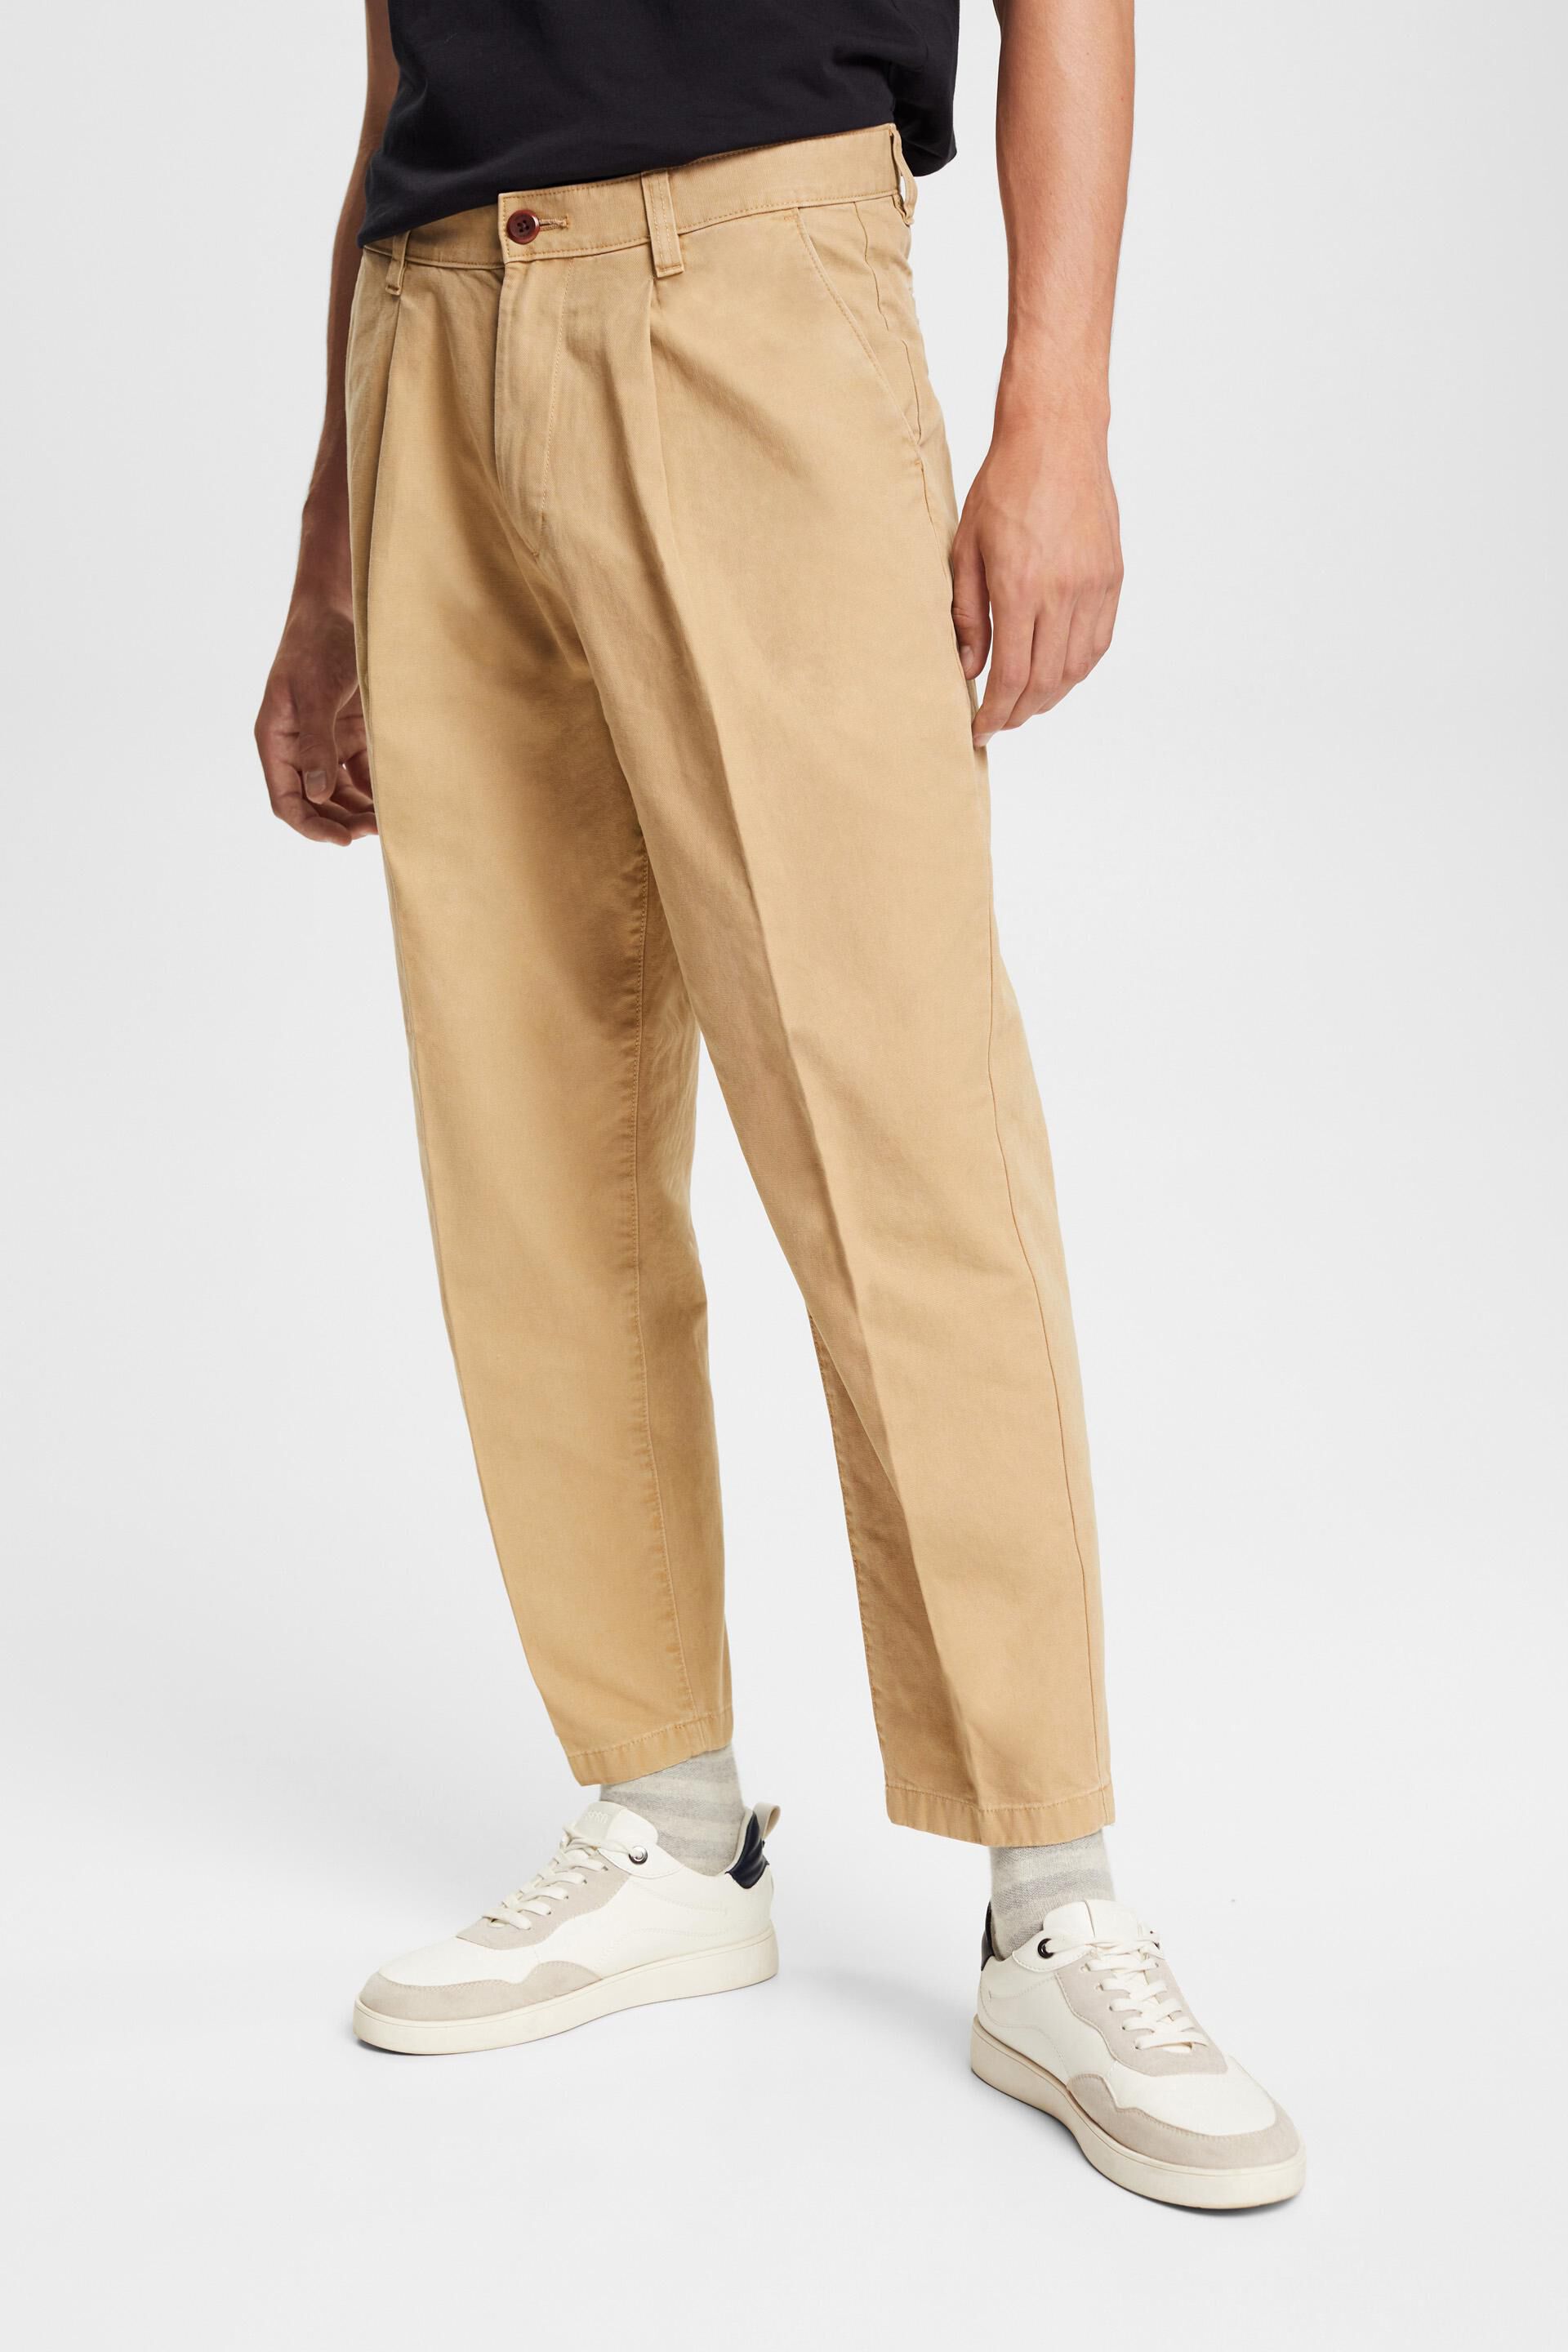 Beatrice .b Cropped Chino Pants | Anthropologie Singapore - Women's  Clothing, Accessories & Home